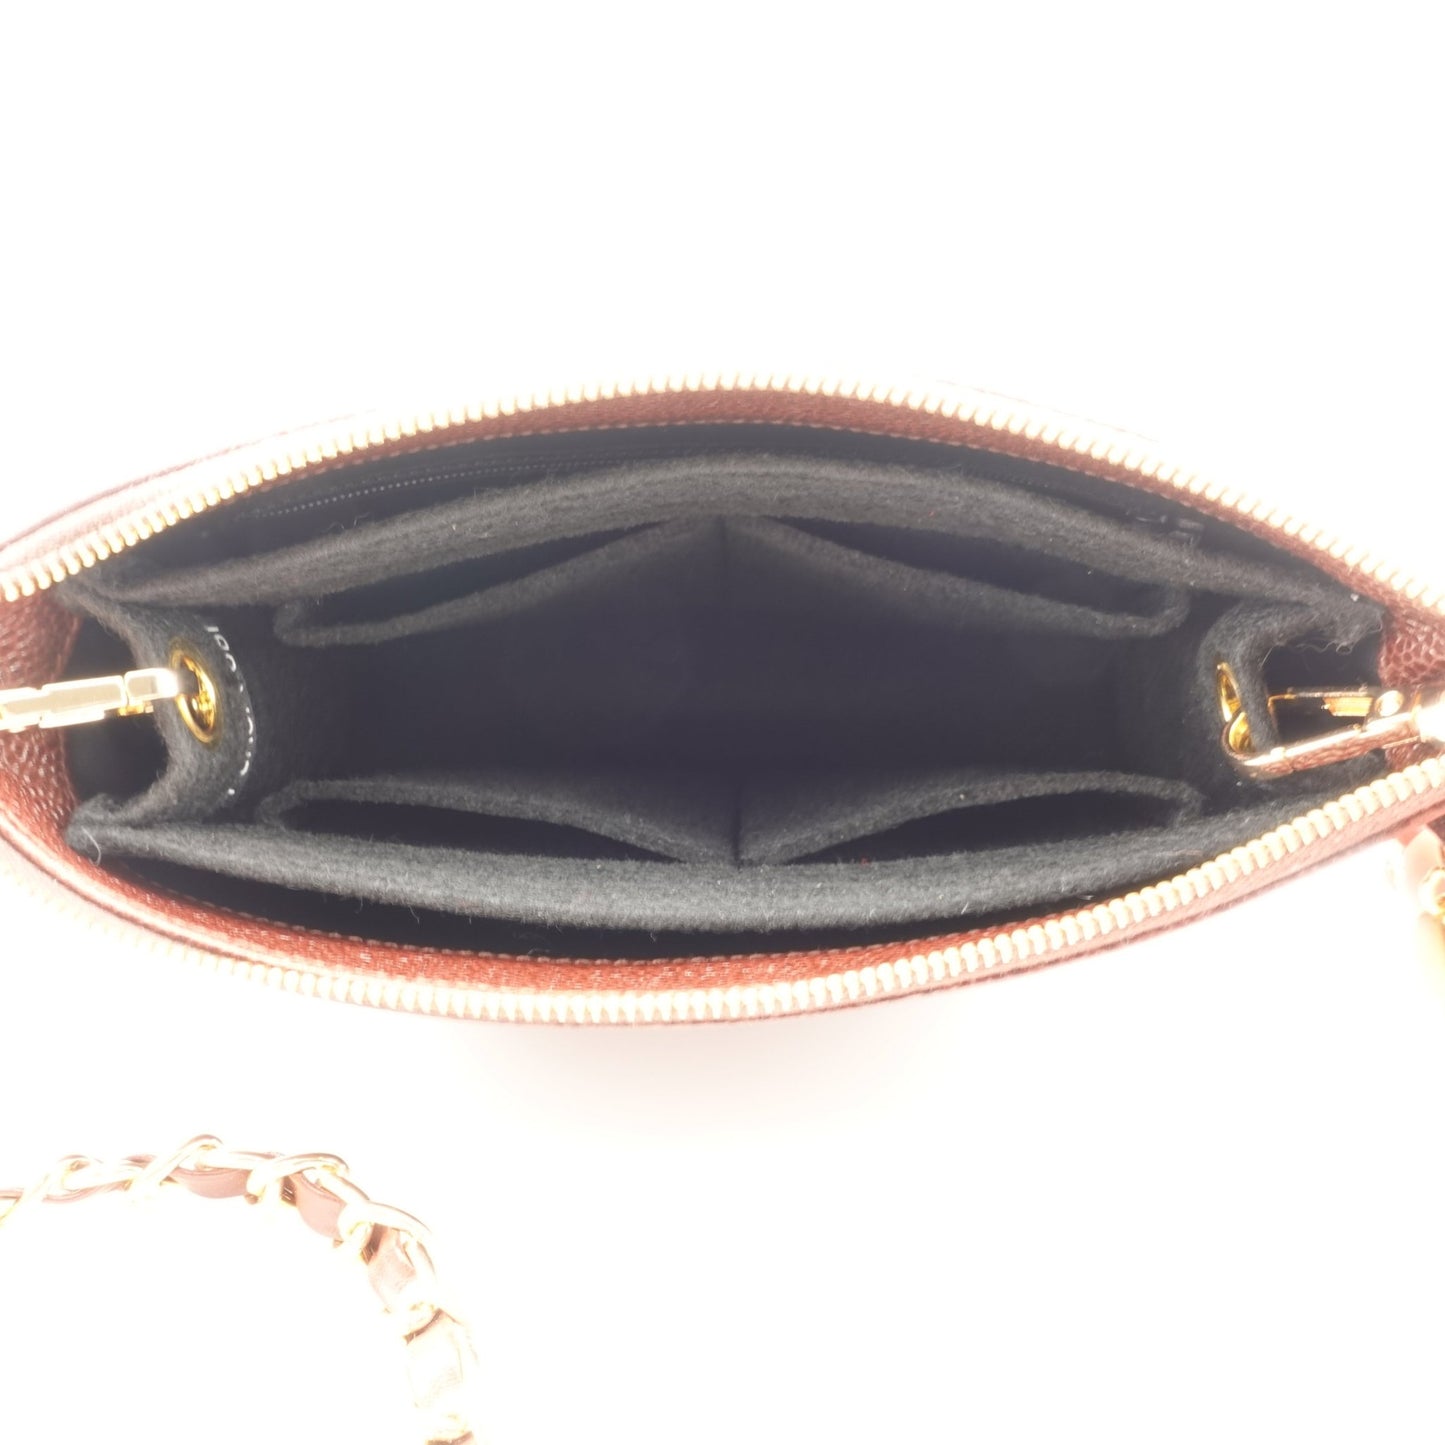 CHANEL Caviar Leather Timeless Pouch on Chain - Bag Envy